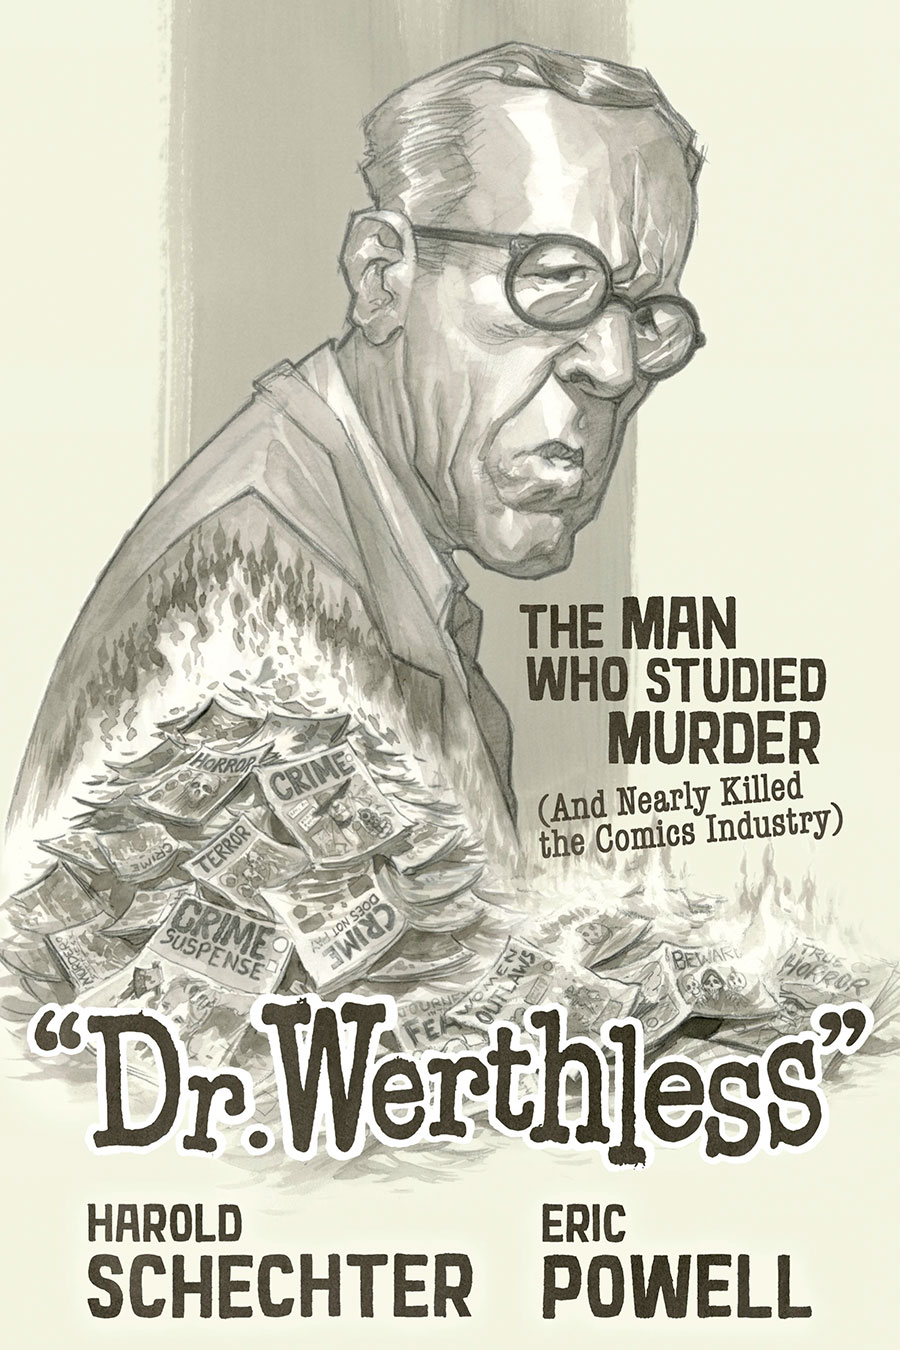 Dr Werthless The Man Who Studied Murder (And Nearly Killed The Comics Industry) HC